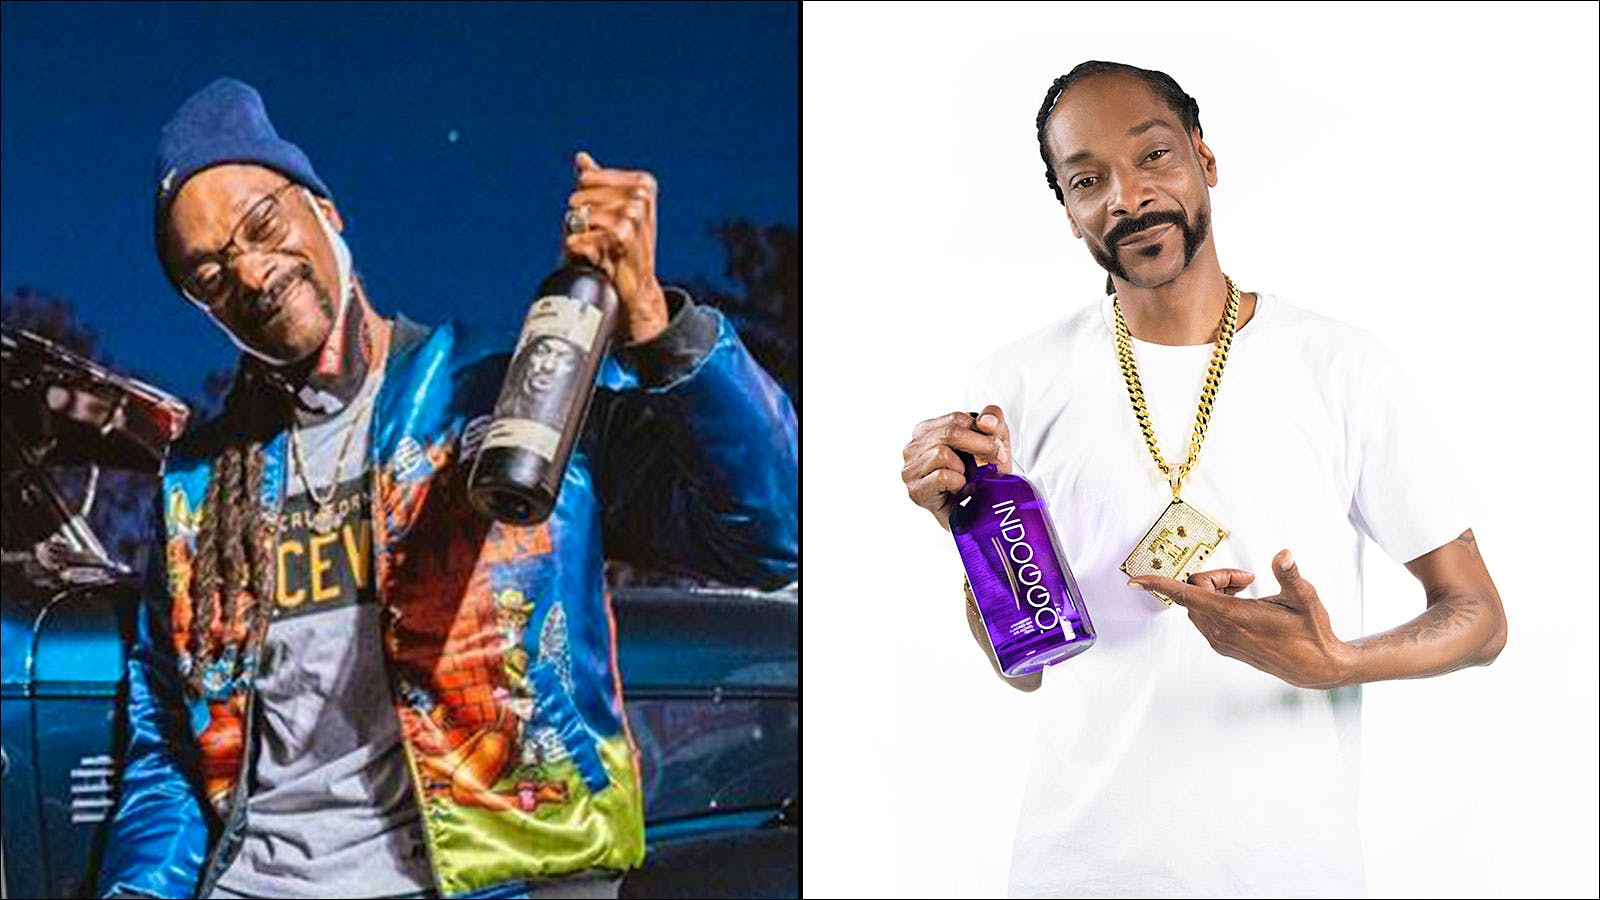 Not-So Laid-Back: Snoop Dogg Releasing a New Gin, as His Wine Project Makes Big NAACP Donation